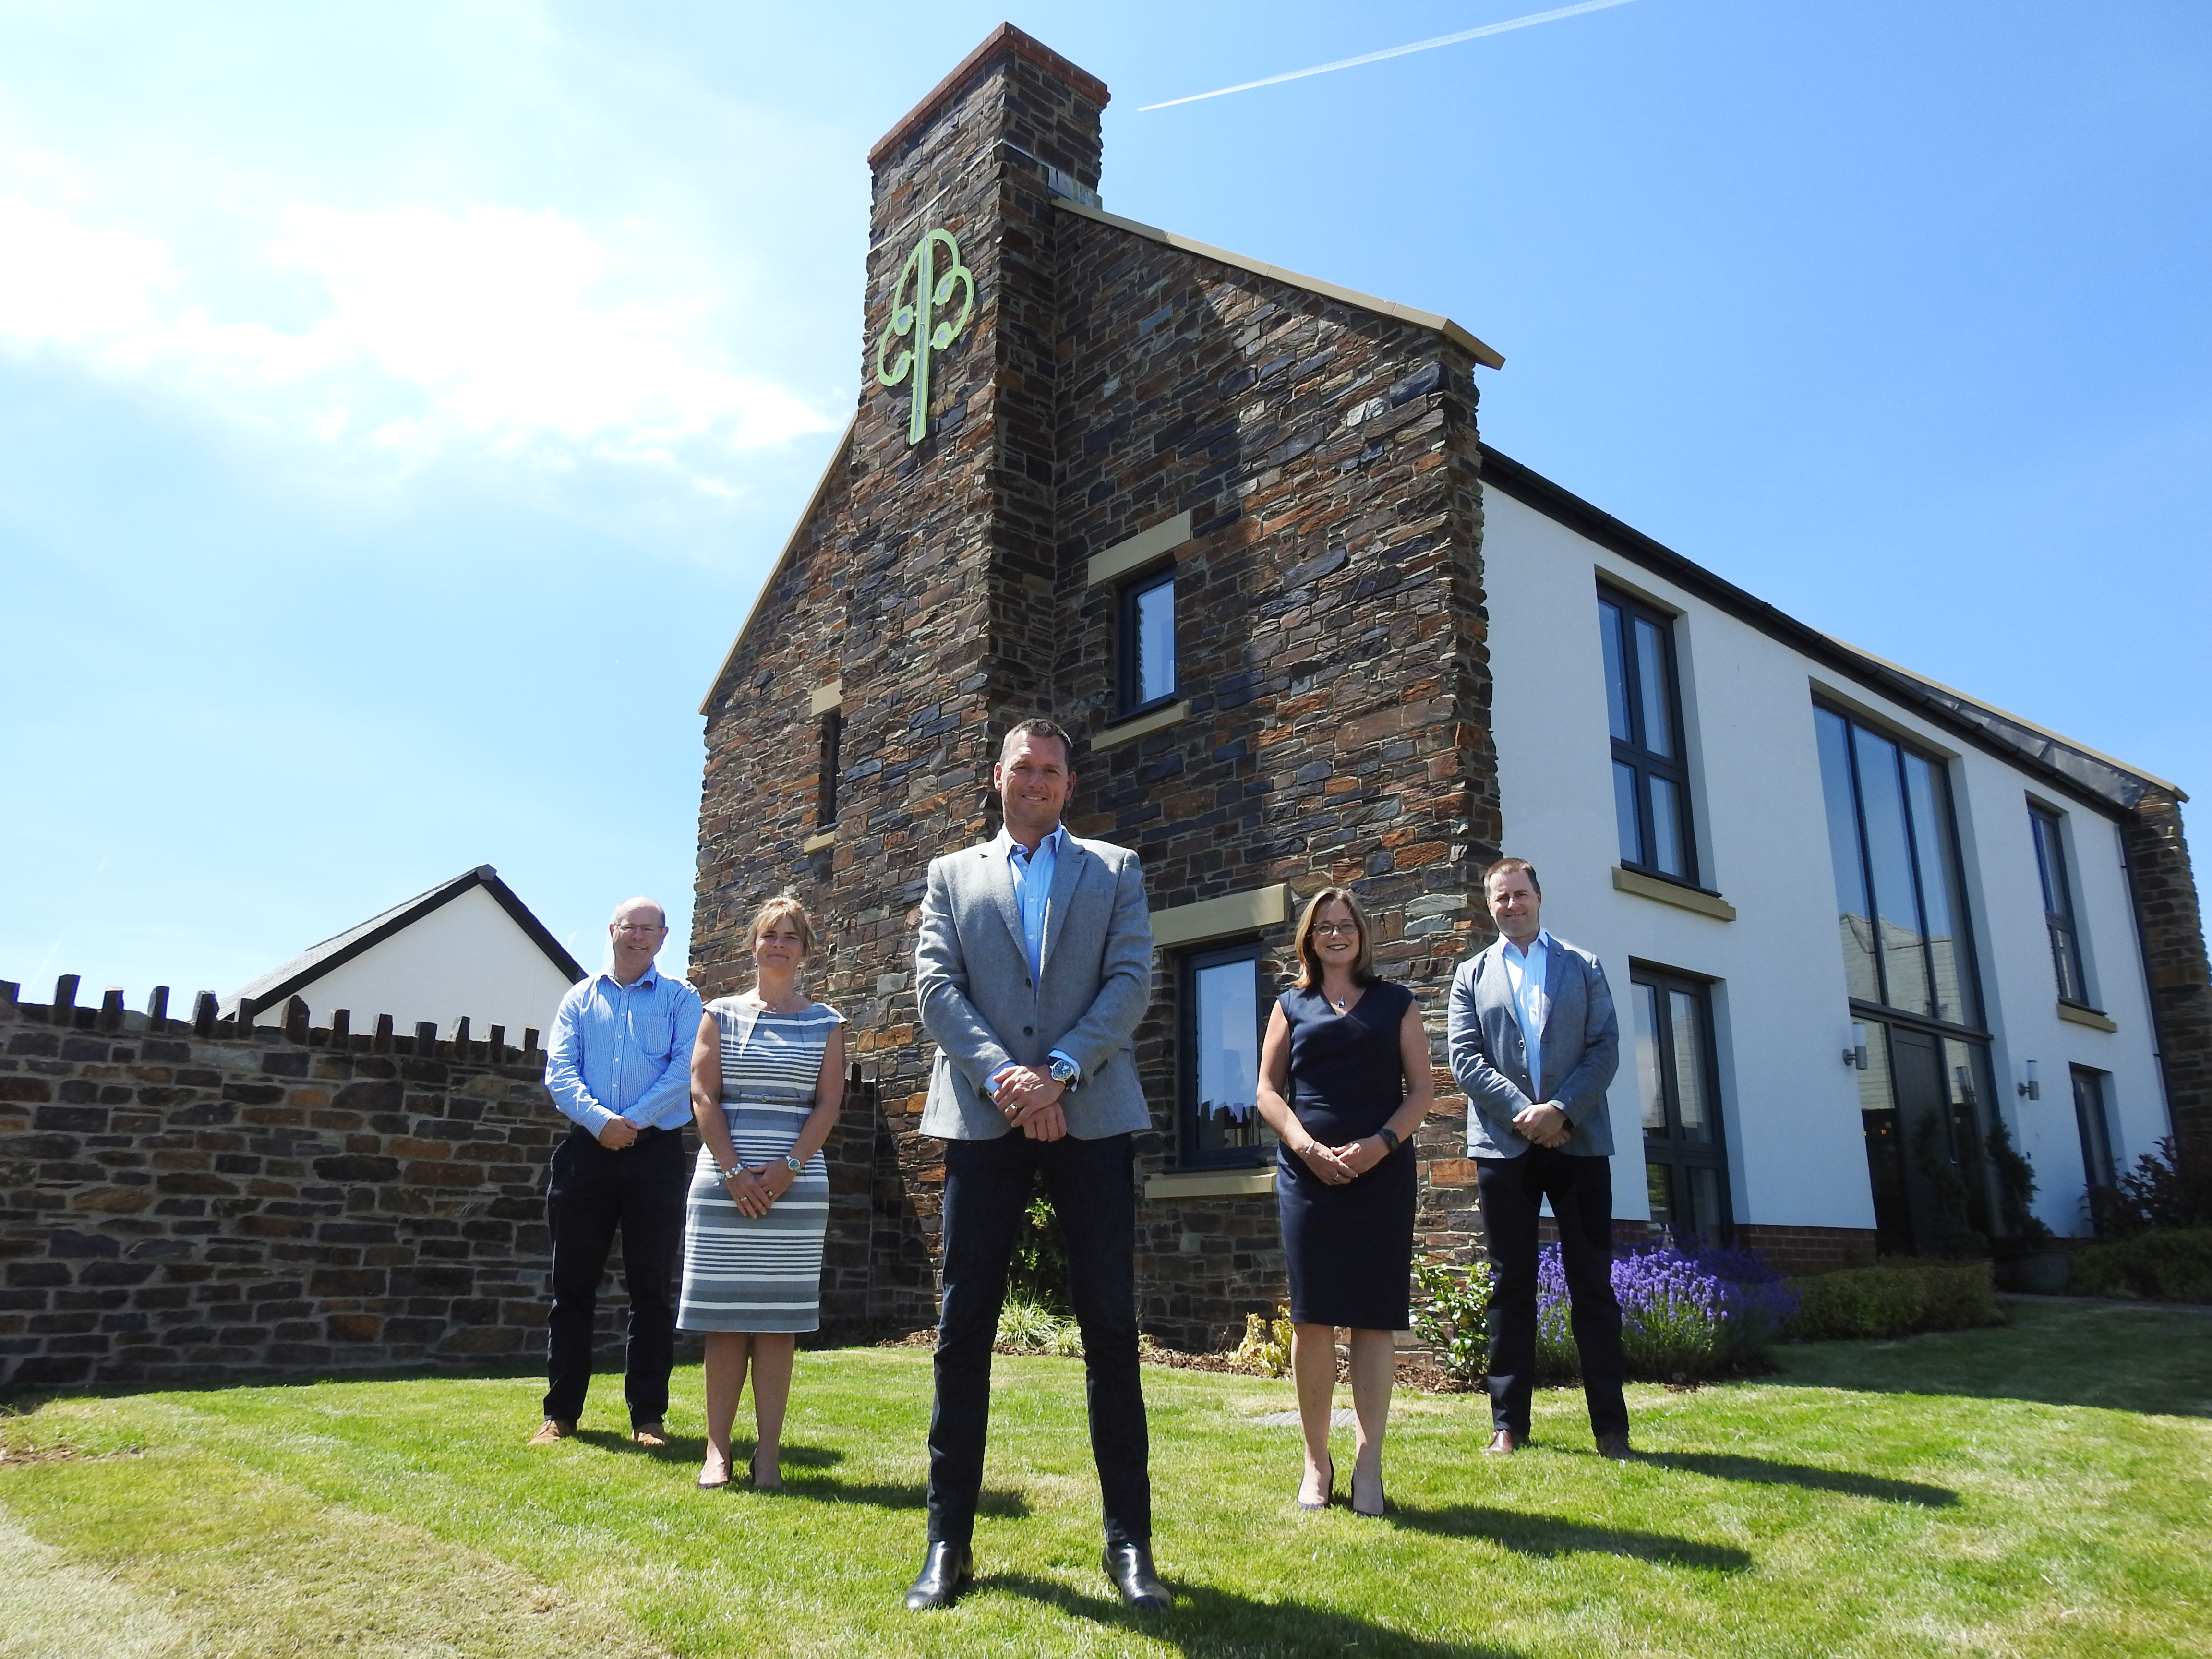 Business as usual for Baker Estates boosted by ‘virtual’ online reservations